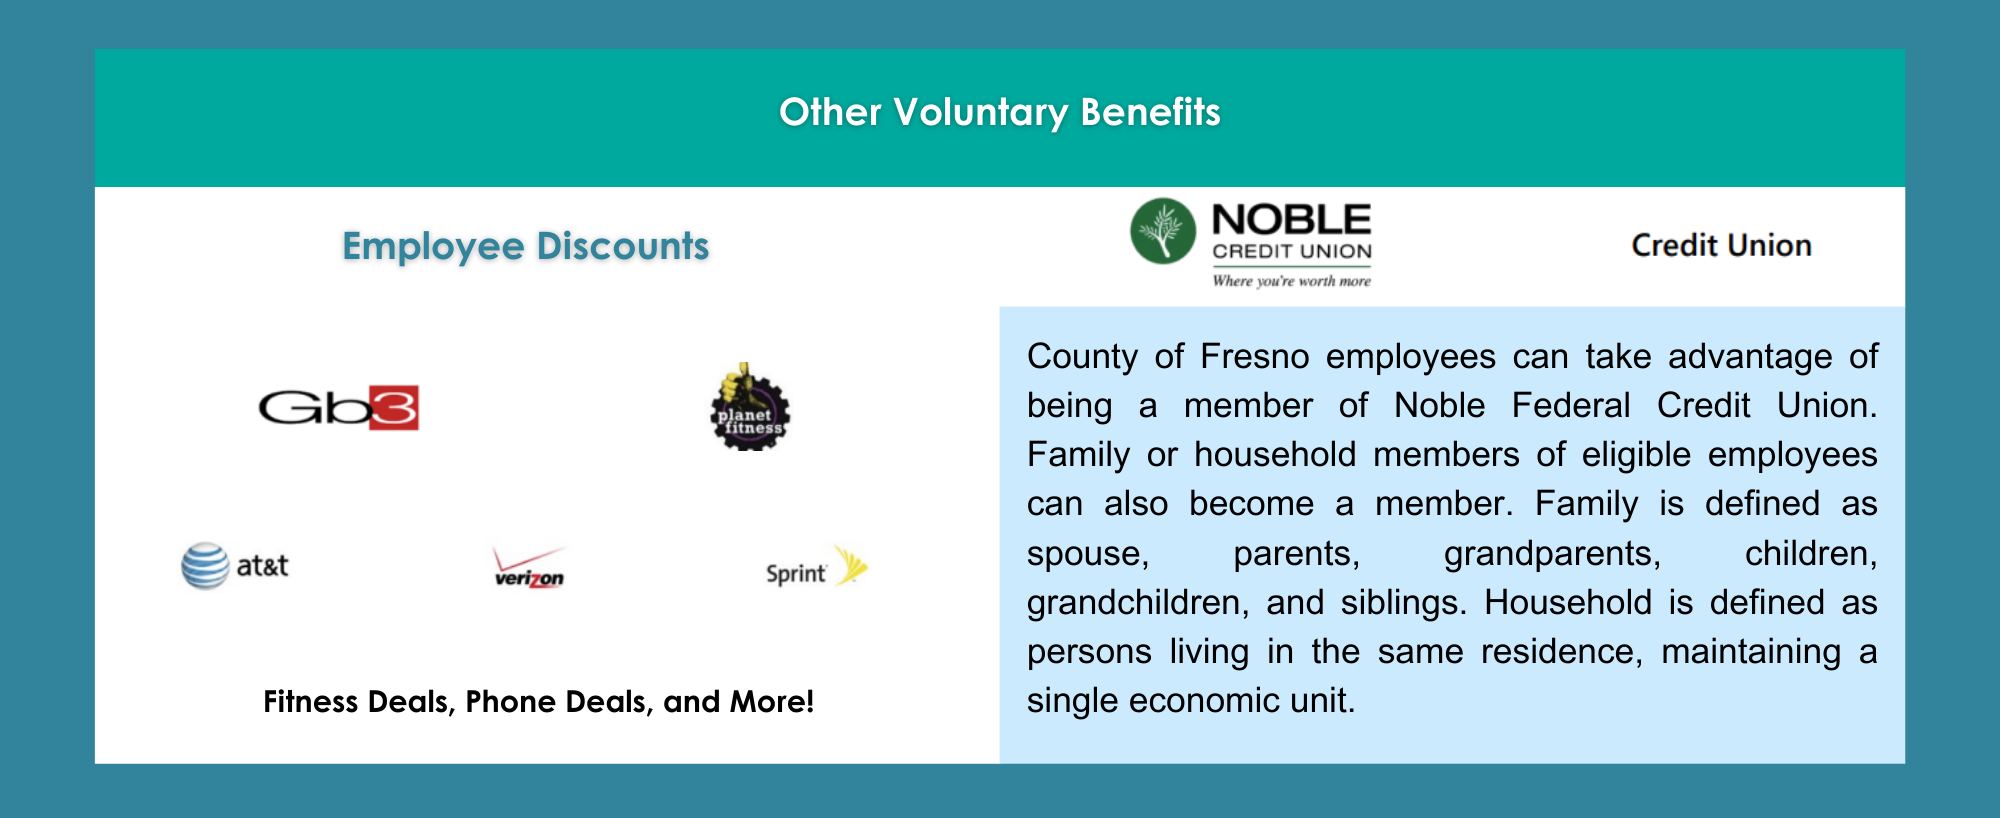 7-Other-Benefits-Details-2.png